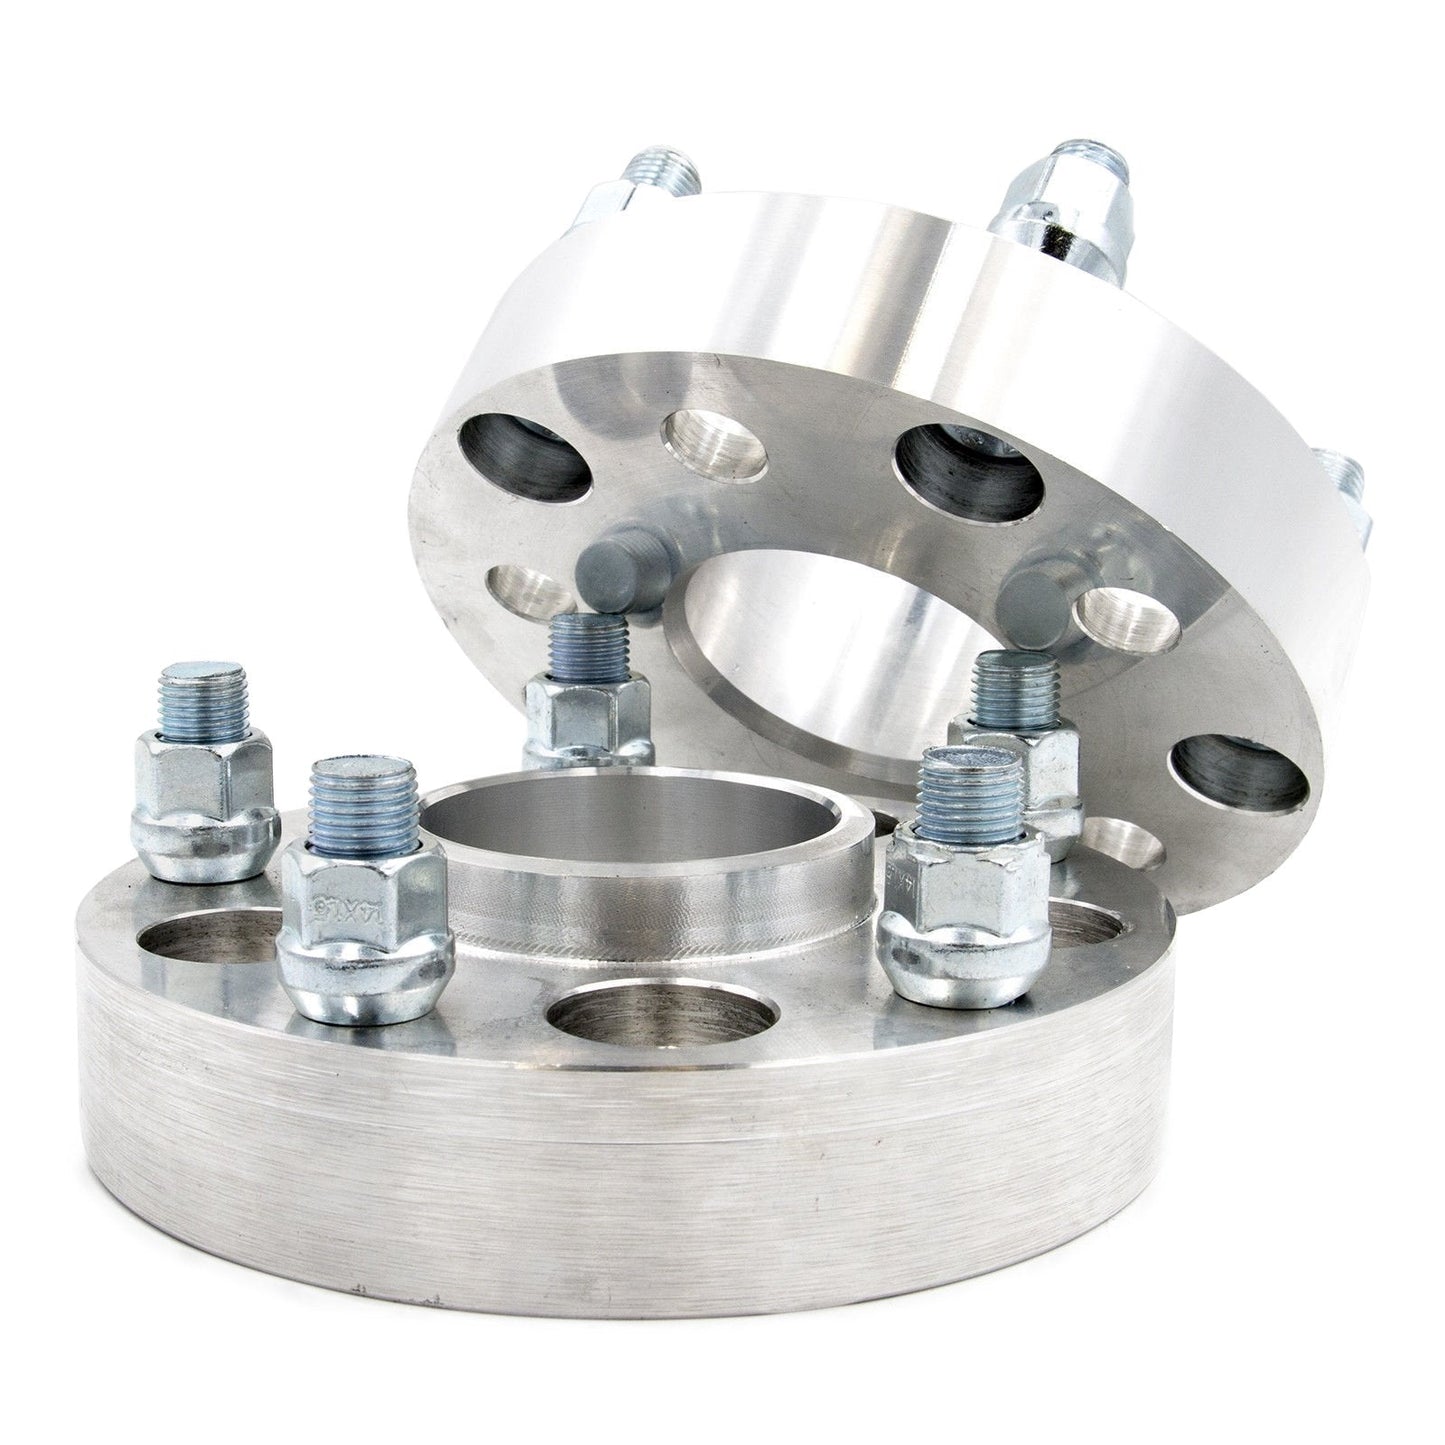 5x4.5" To 5x5" Hub Centric Wheel Adapters - Thickness: 1"- 4"